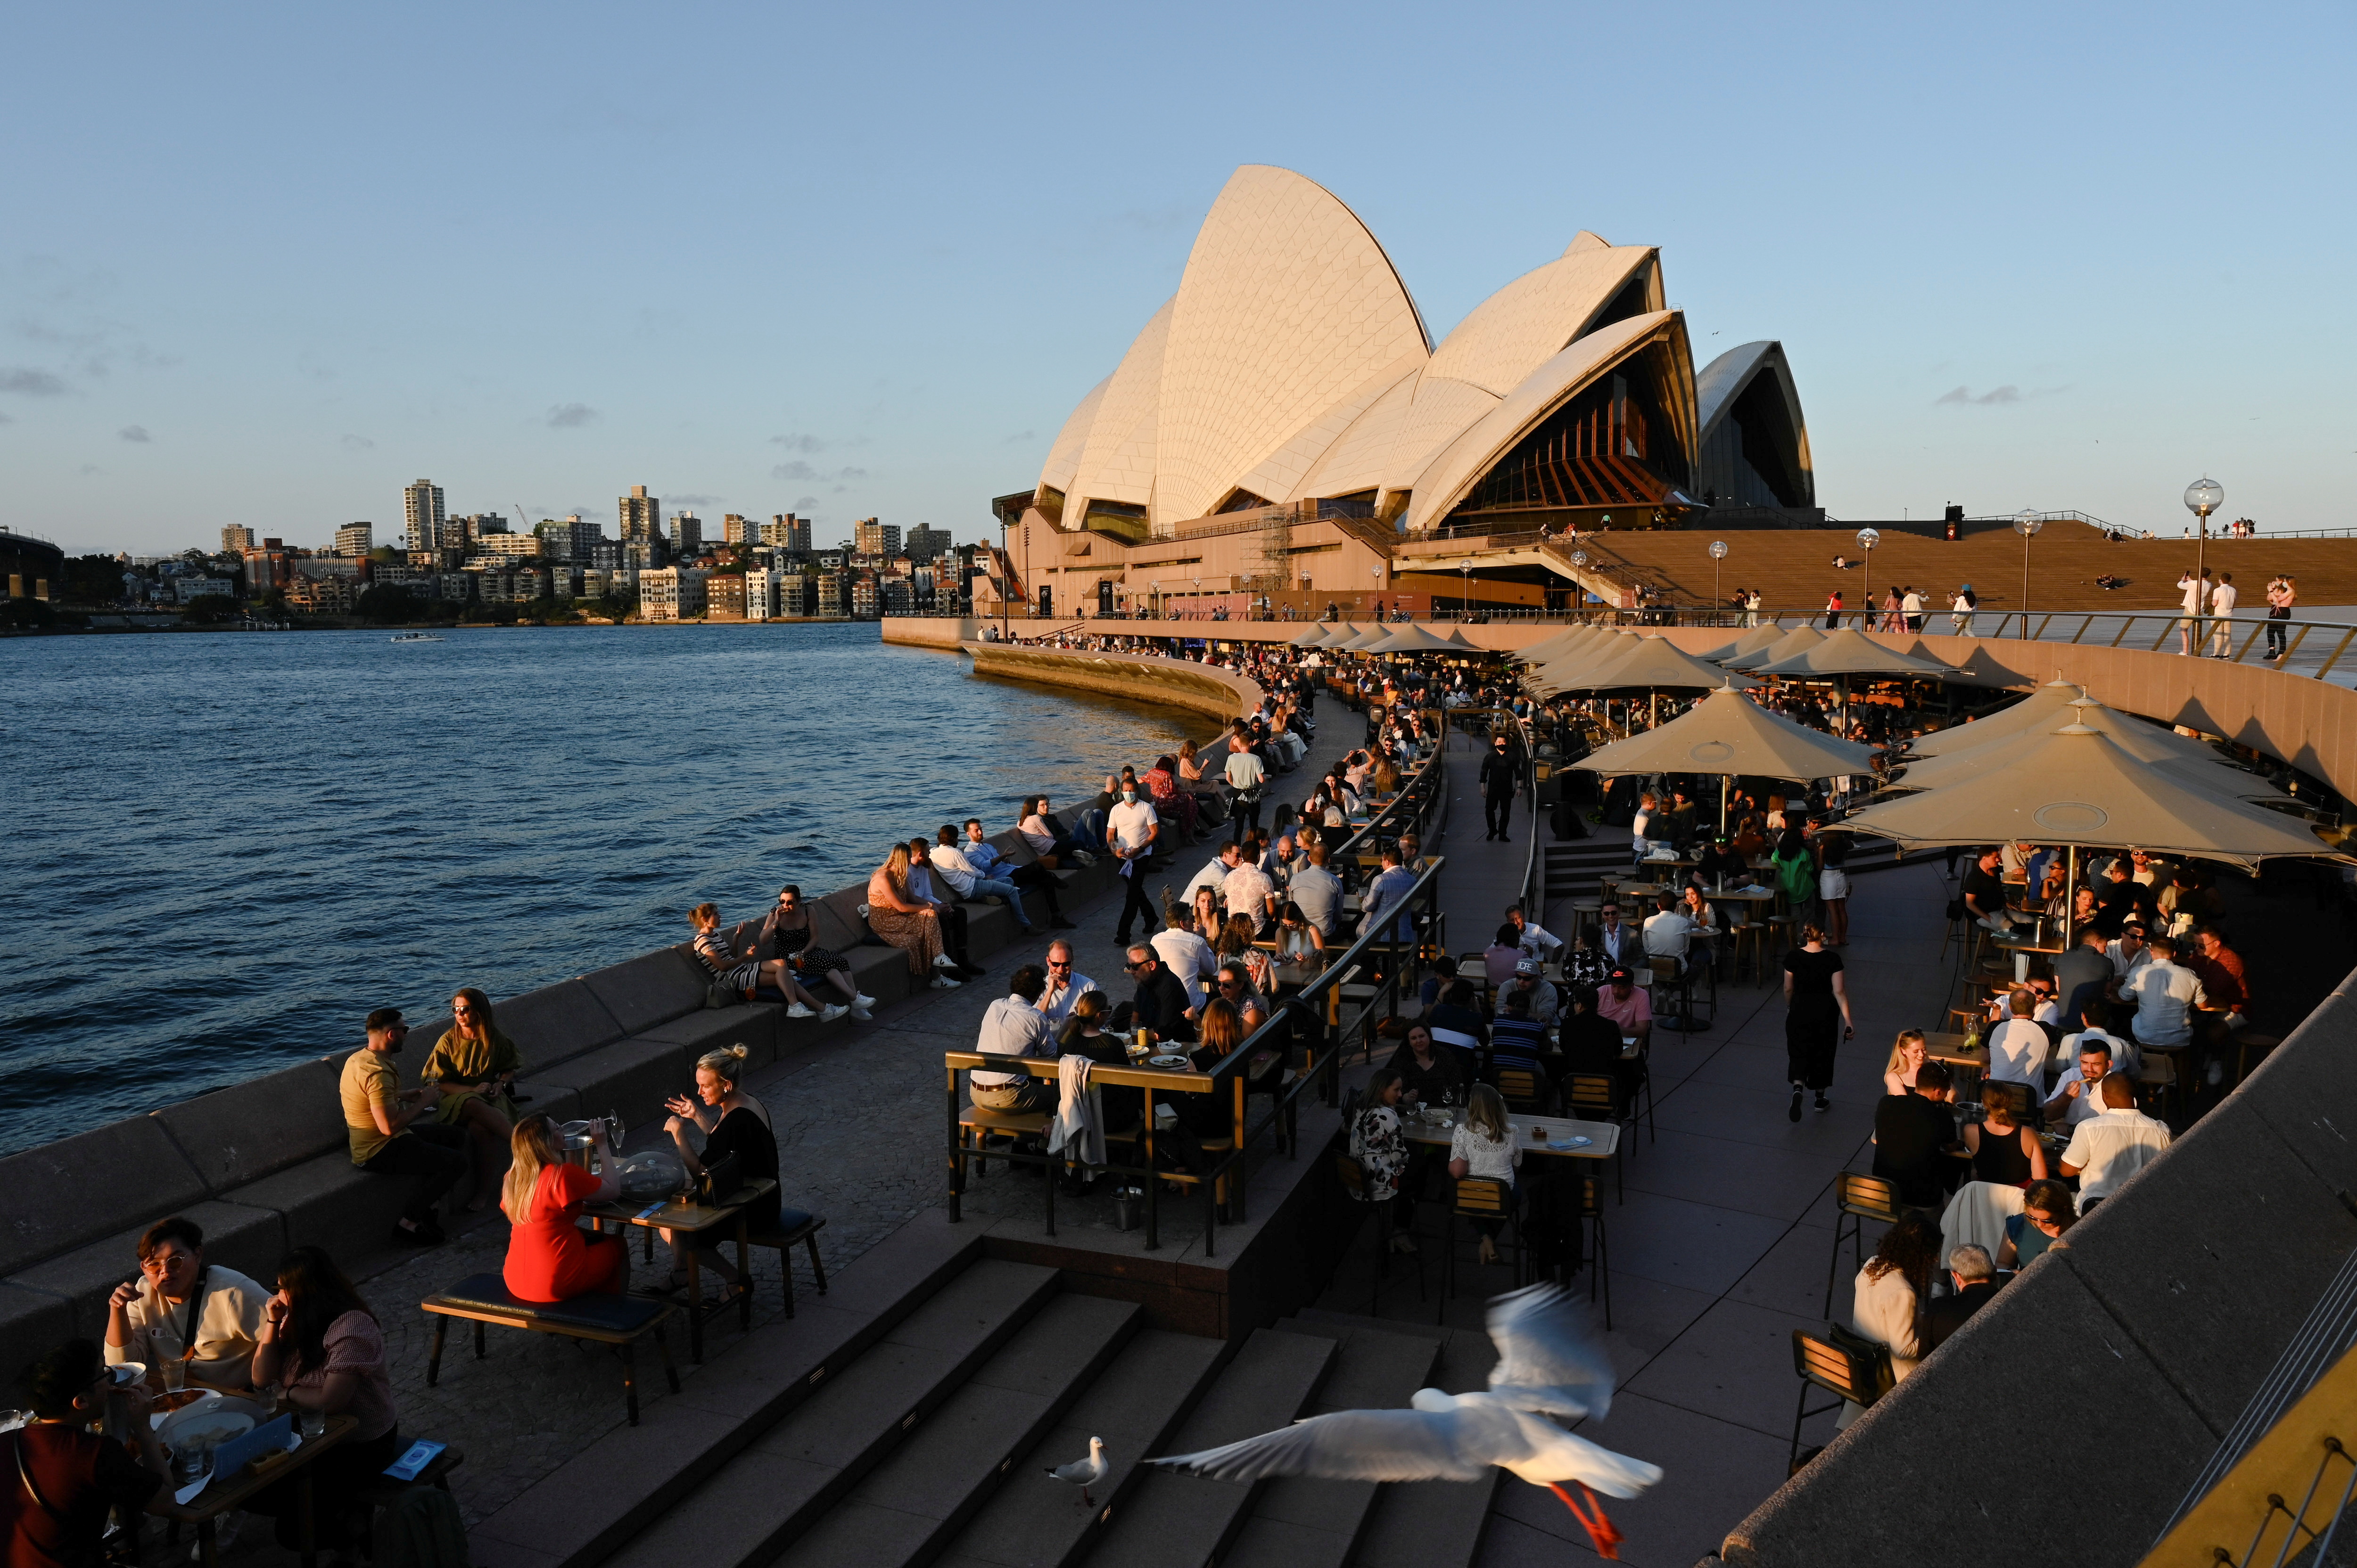 Borrowers eat at a bar by the harbor in the wake of easing the rules for coronavirus disease (COVID-19), following an extended shutdown to curb an outbreak, in Sydney, Australia, on October 22, 2021. REUTERS / Jaimi Joy